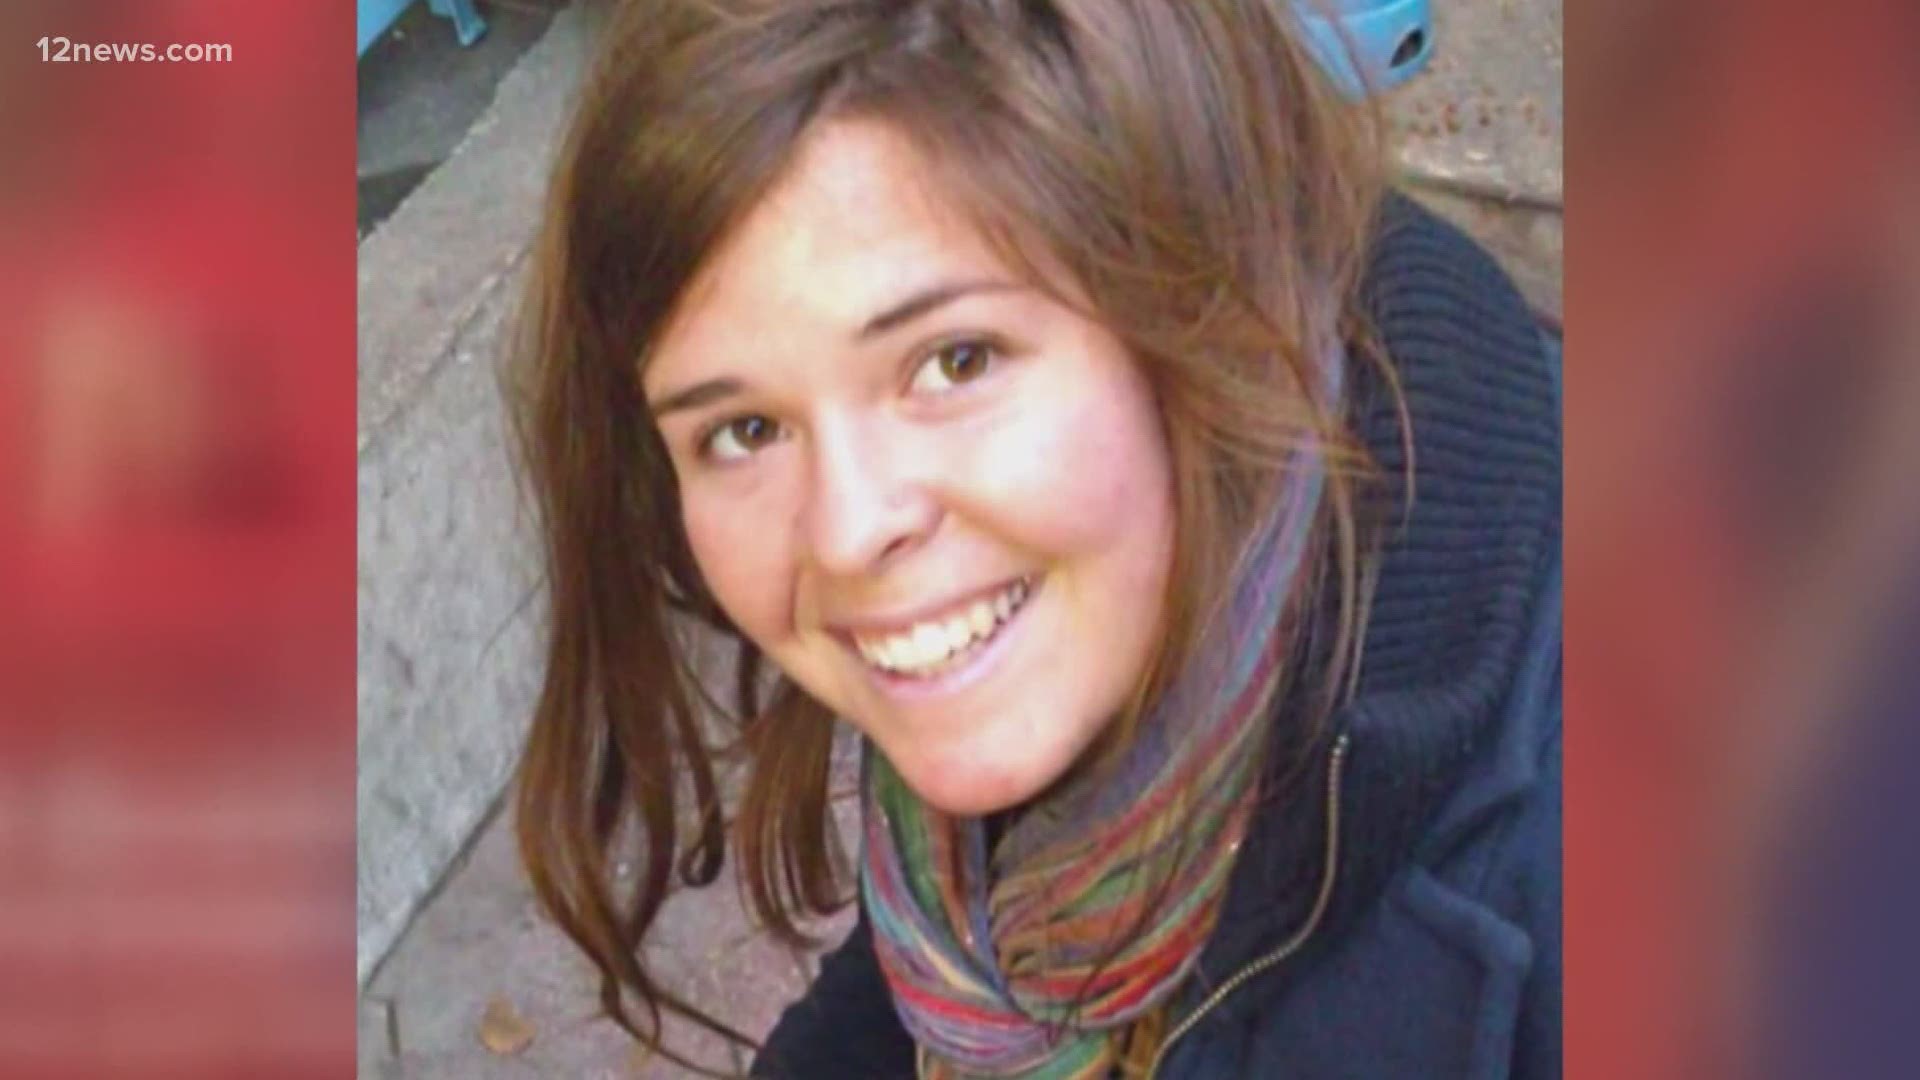 Kayla, an aid worker from Prescott, was killed in 2015 after almost two years as an ISIS hostage. Two men accused of torturing her are now facing charges in the U.S.